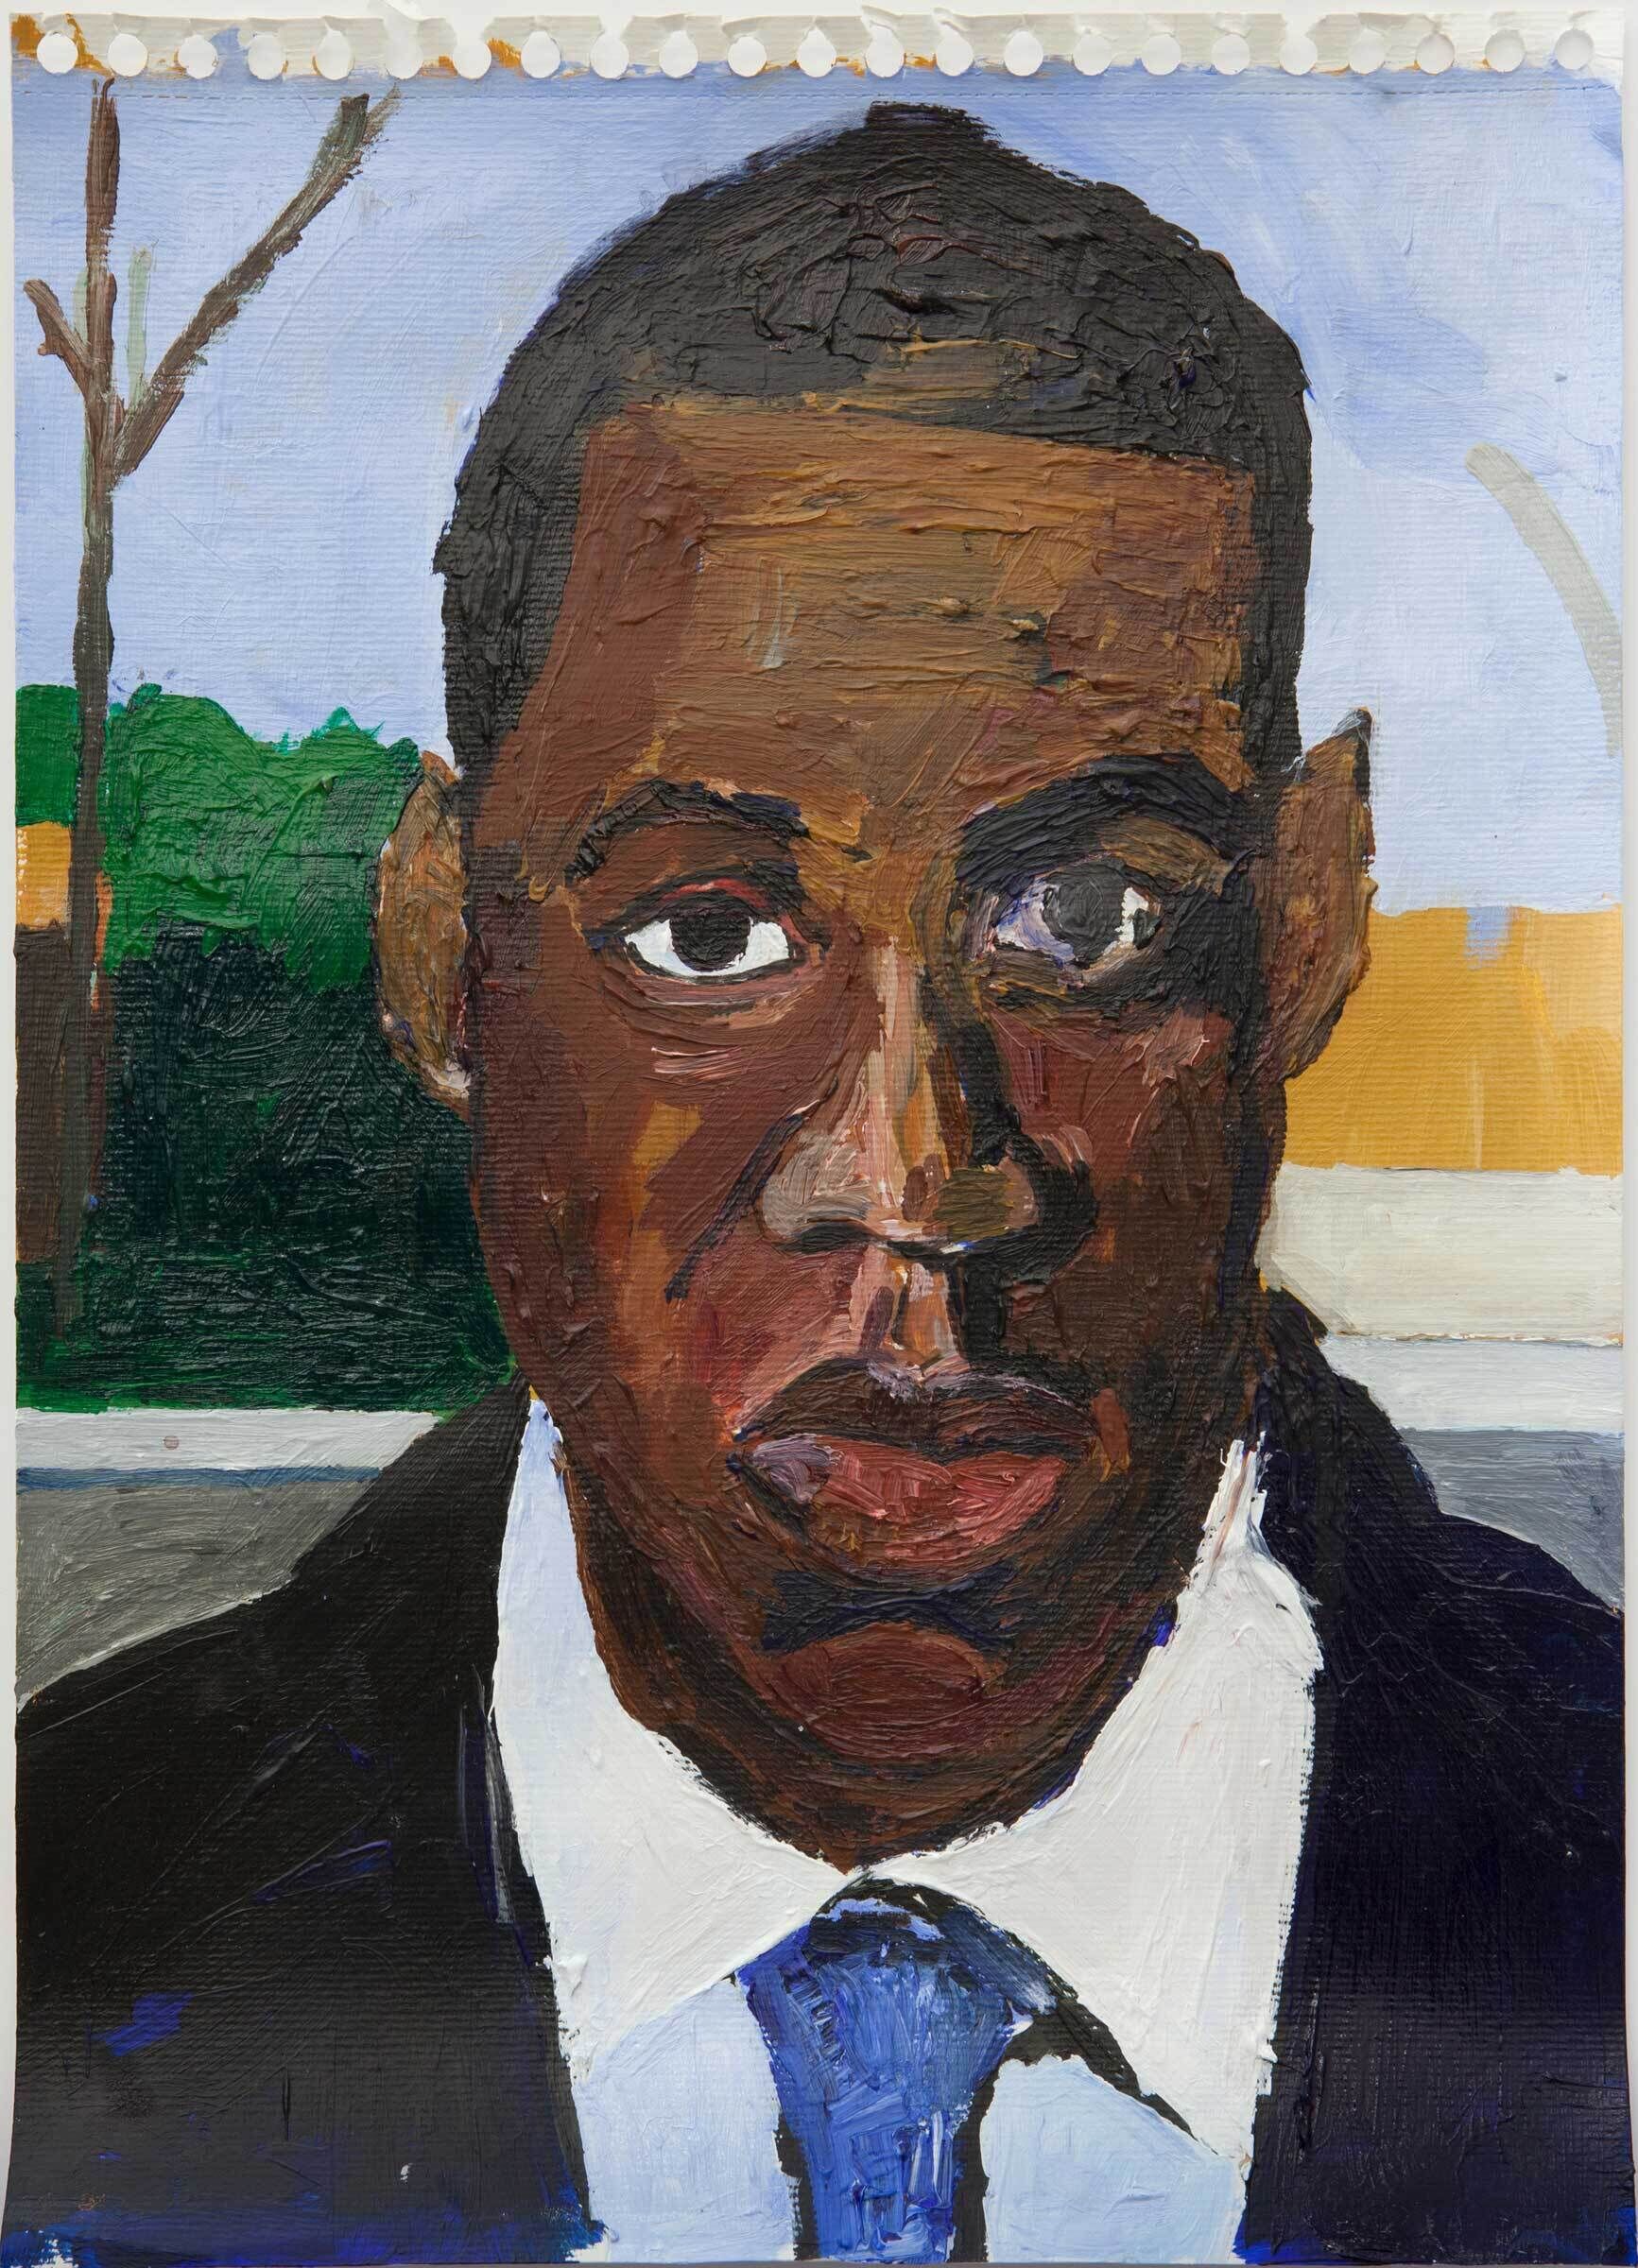 A closeup portrait of a Black man in a suit and tie. He appears to be standing in front of a neighborhood street, as a road, sidewalk, bushes, and a wooden fence are visible in the background.